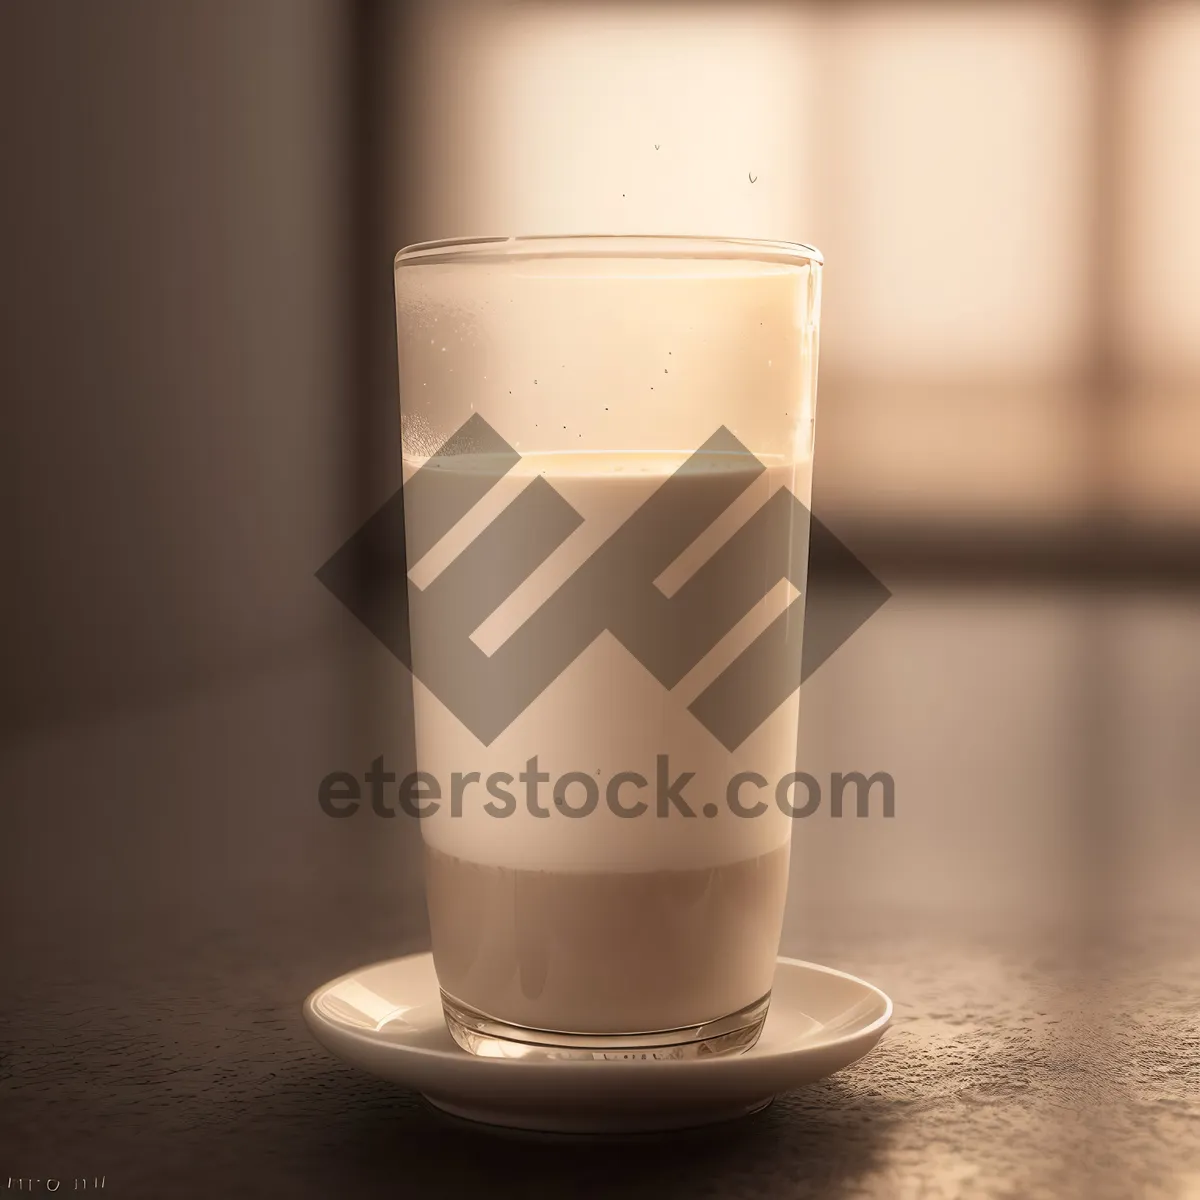 Picture of Delicious Milk Beverage in Glass Cup